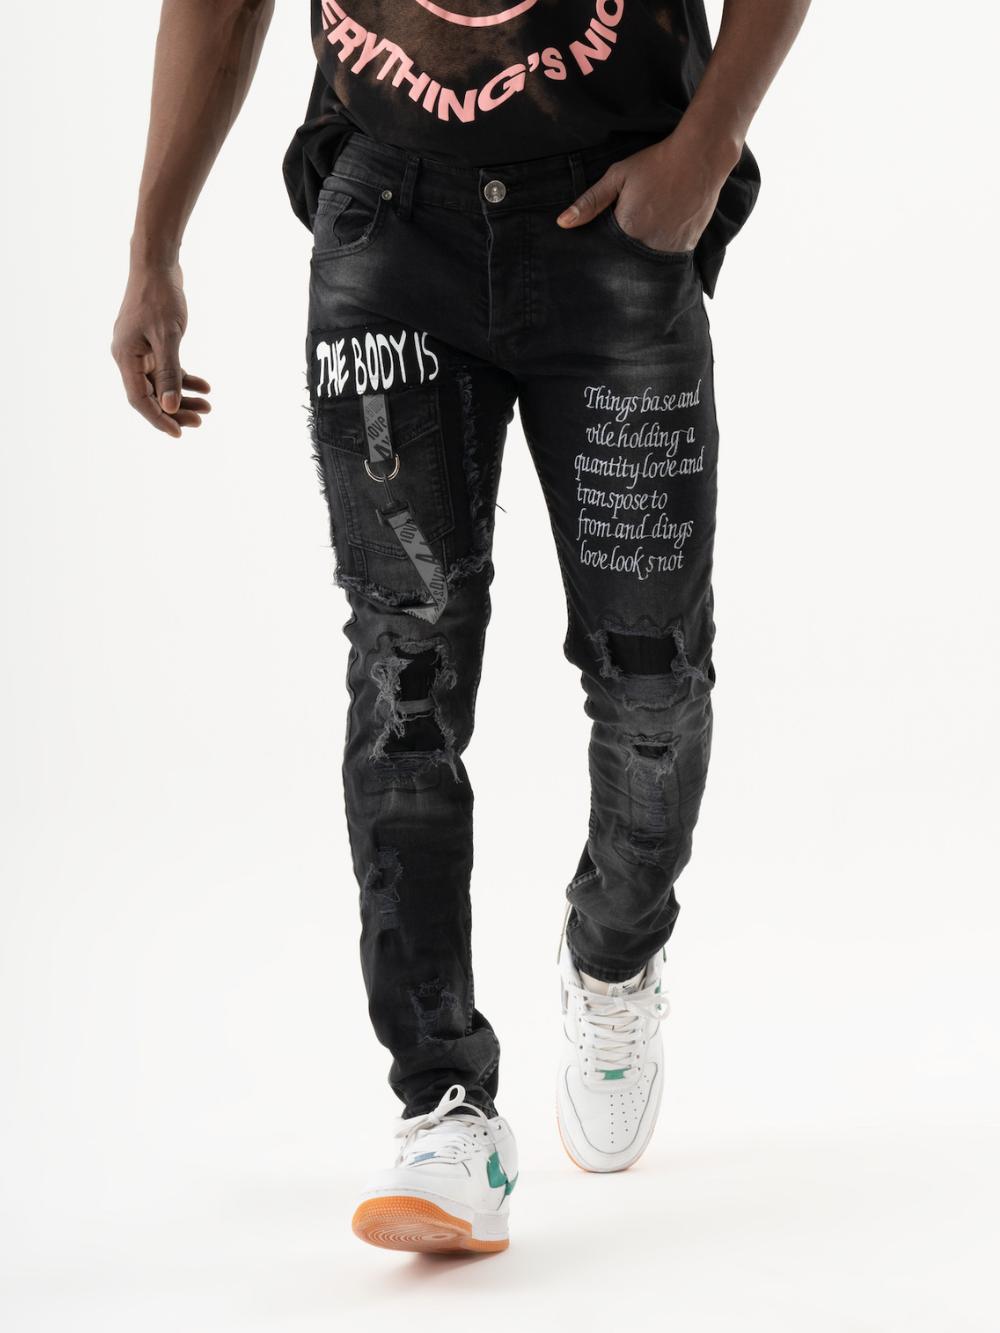 A black man wearing an ONE SOUL t - shirt and jeans.